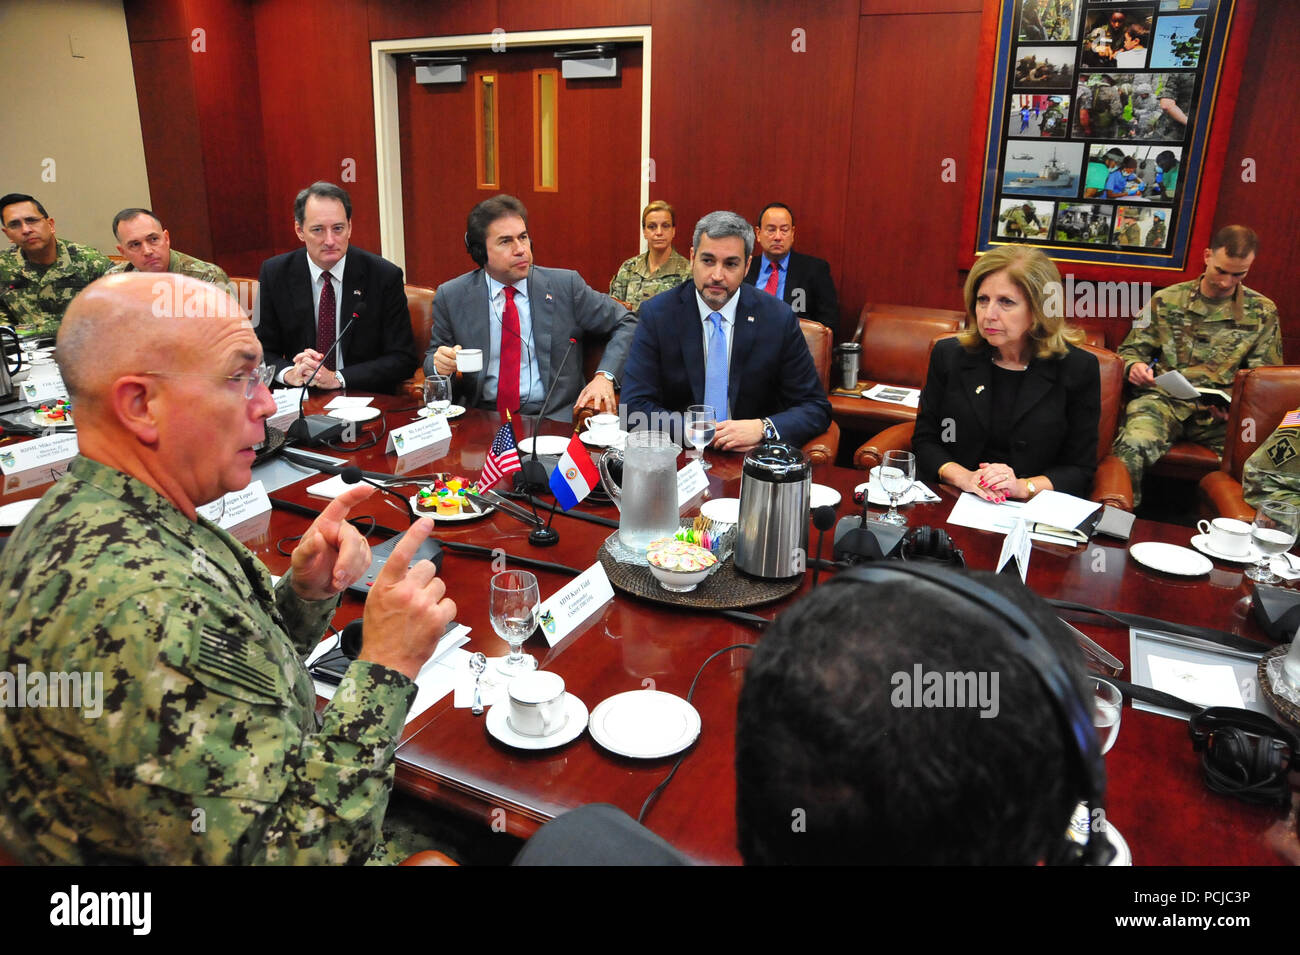 Mario Abdo Benitez, President-elect of Paraguay, listens to U.S. Navy Adm. Kurt Tidd, commander of U.S. Southern Command, while discussing the U.S.-Paraguay defense partnership during a meeting with members of the U.S. military headquarters July 30. The close collaborative ties between the United States and Paraguay include many decades of strong security cooperation based on common interests, shared goals and mutual respect. (U.S. Southern Command photo by Juan Chiari) Stock Photo